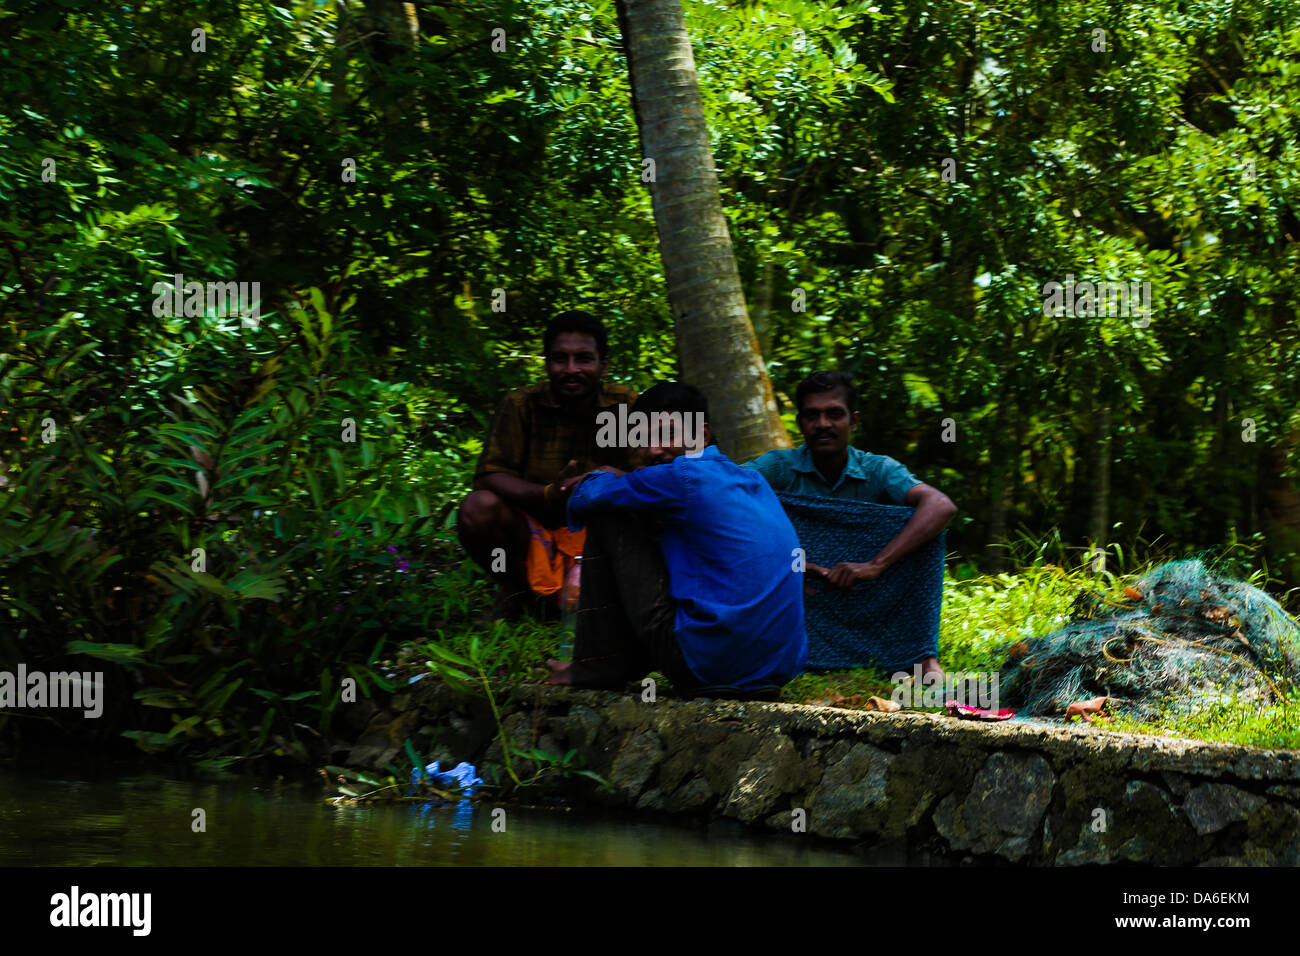 Serenity and calmness of village life Stock Photo